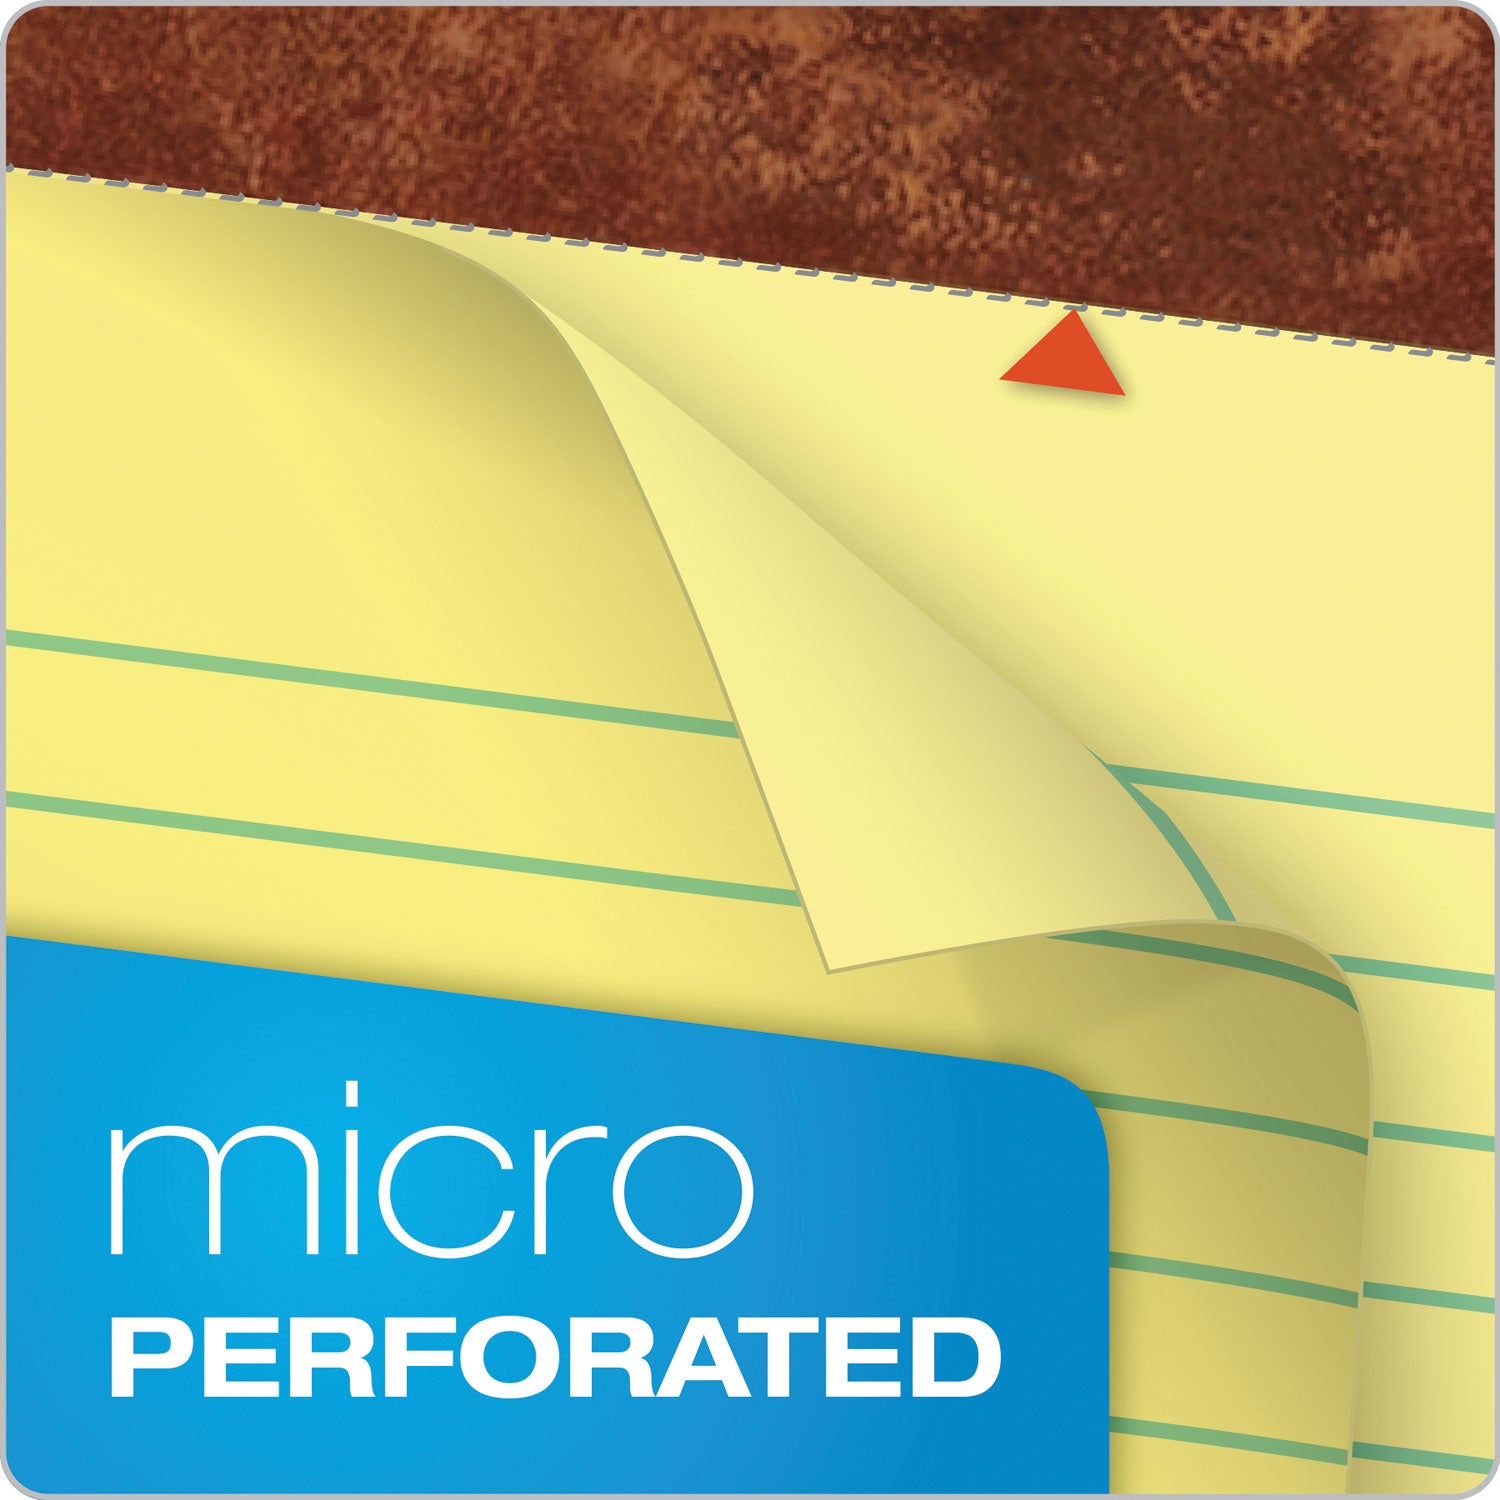 The Legal Pad" Ruled Perforated Pads, Wide/Legal Rule, 50 Canary-Yellow 8.5 x 11 Sheets, 3/Pack - 